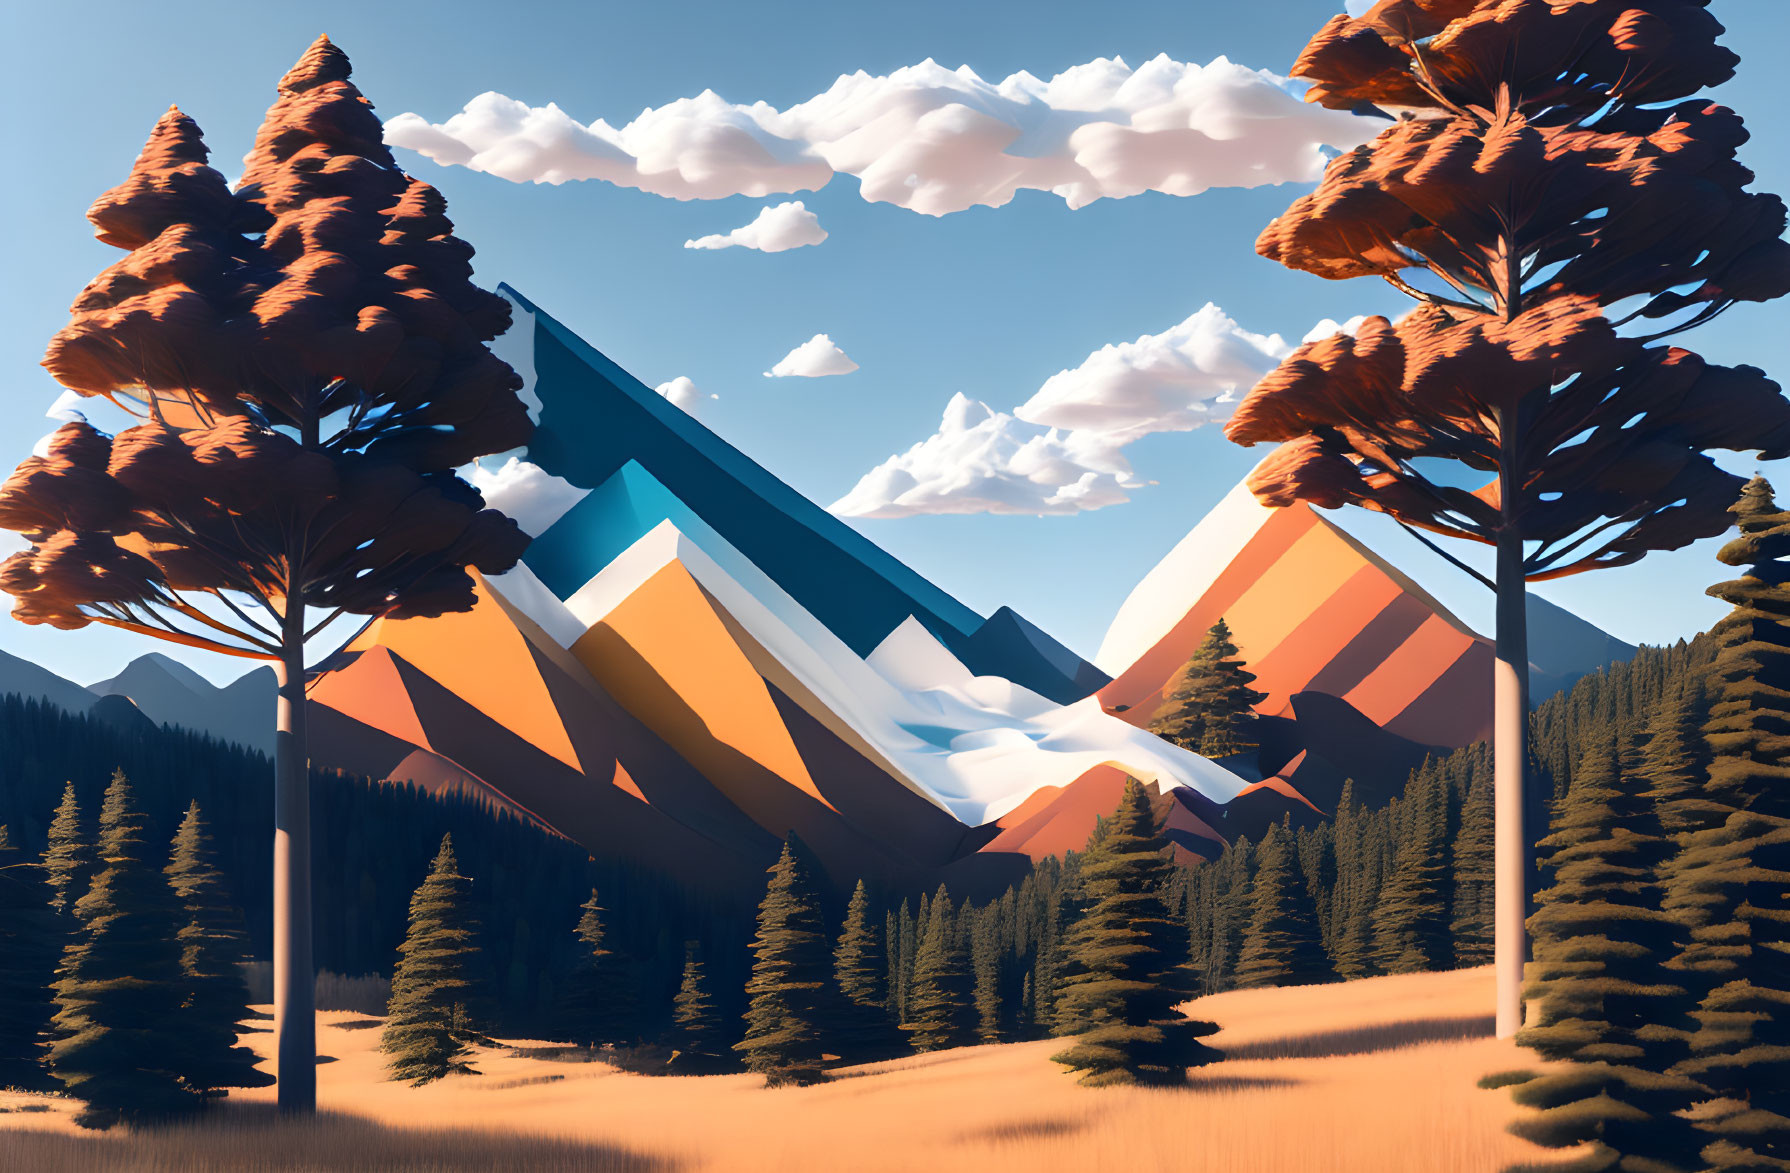 Geometric mountain landscape with orange trees and clouds